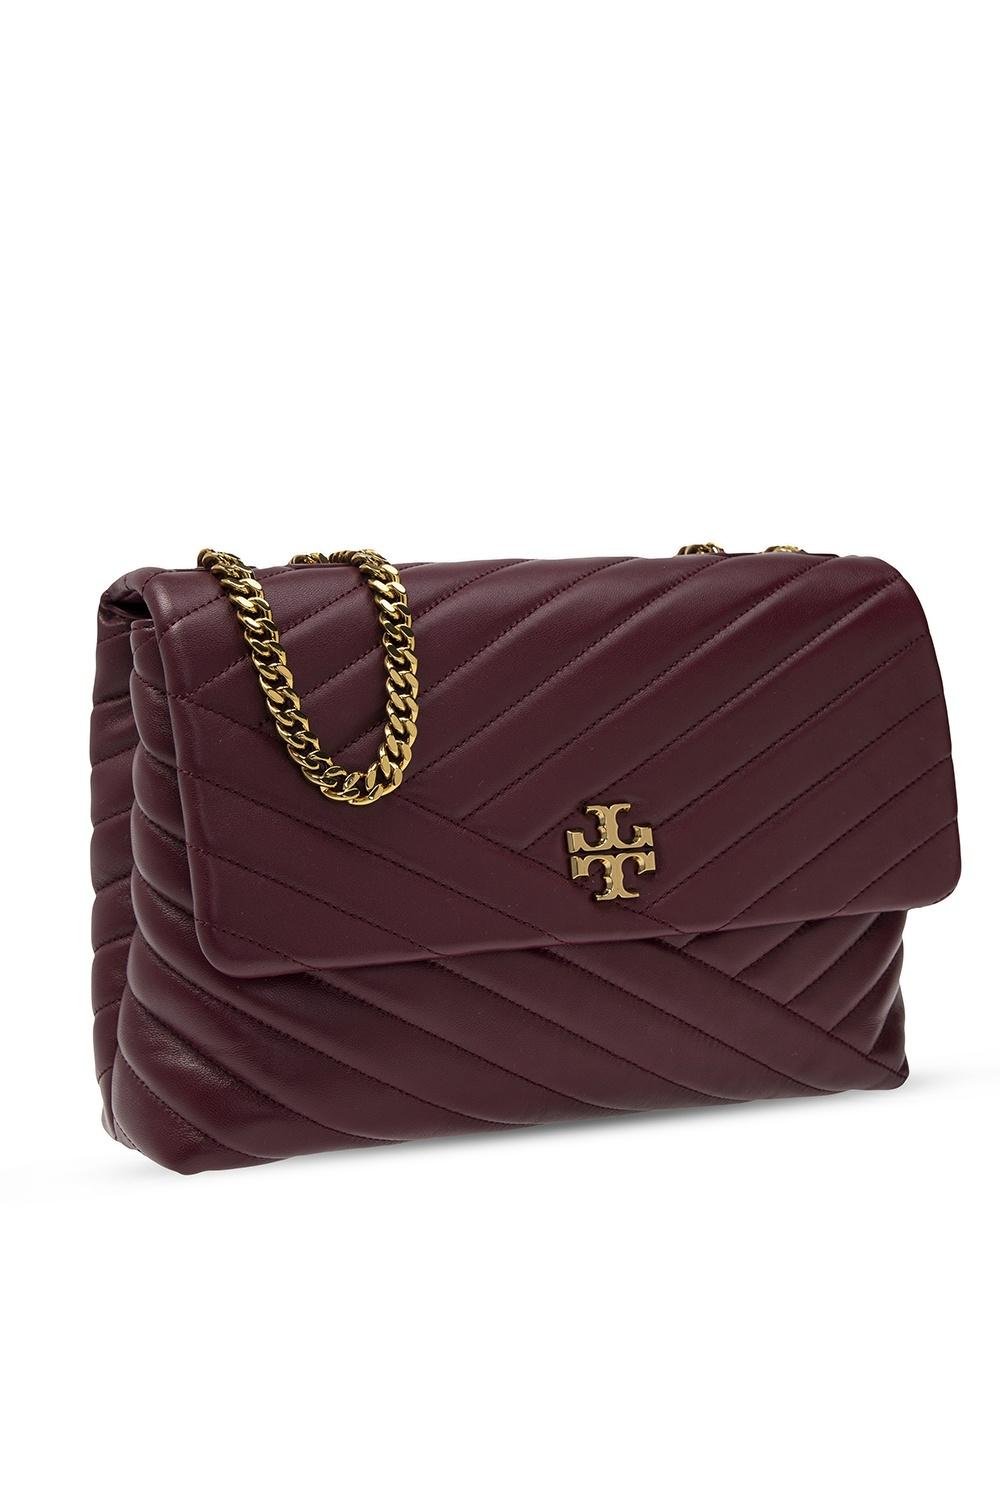 Tory Burch Kira Chevron-quilted Convertible Shoulder Bag In New